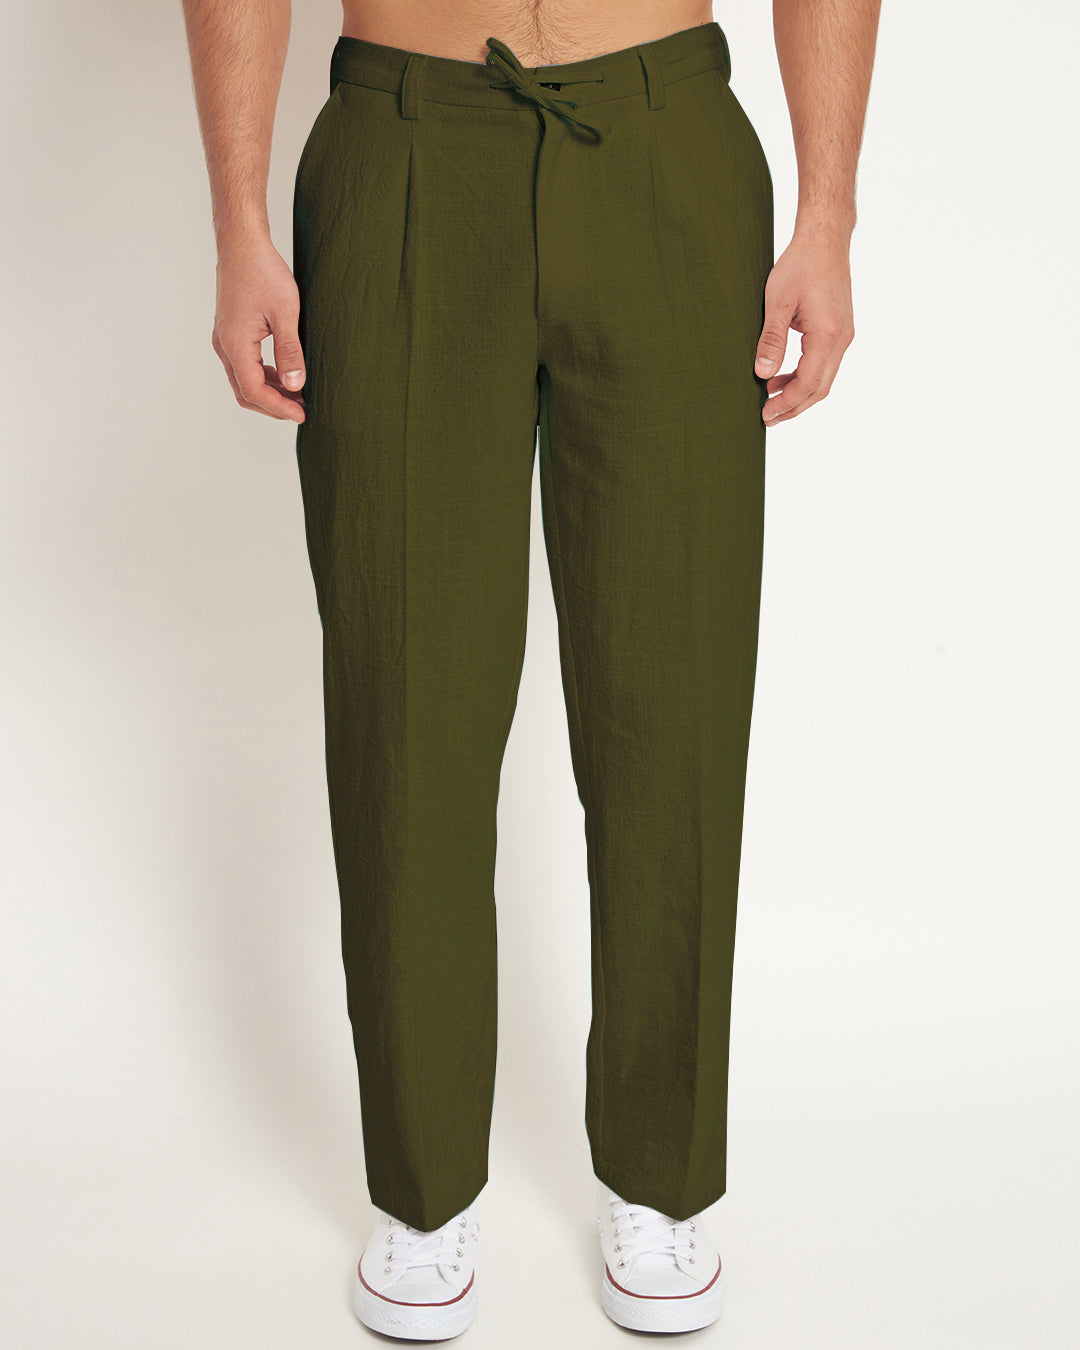 Combo: Casual Ease Midnight Blue & Olive Green Men's Pants - Set of 2